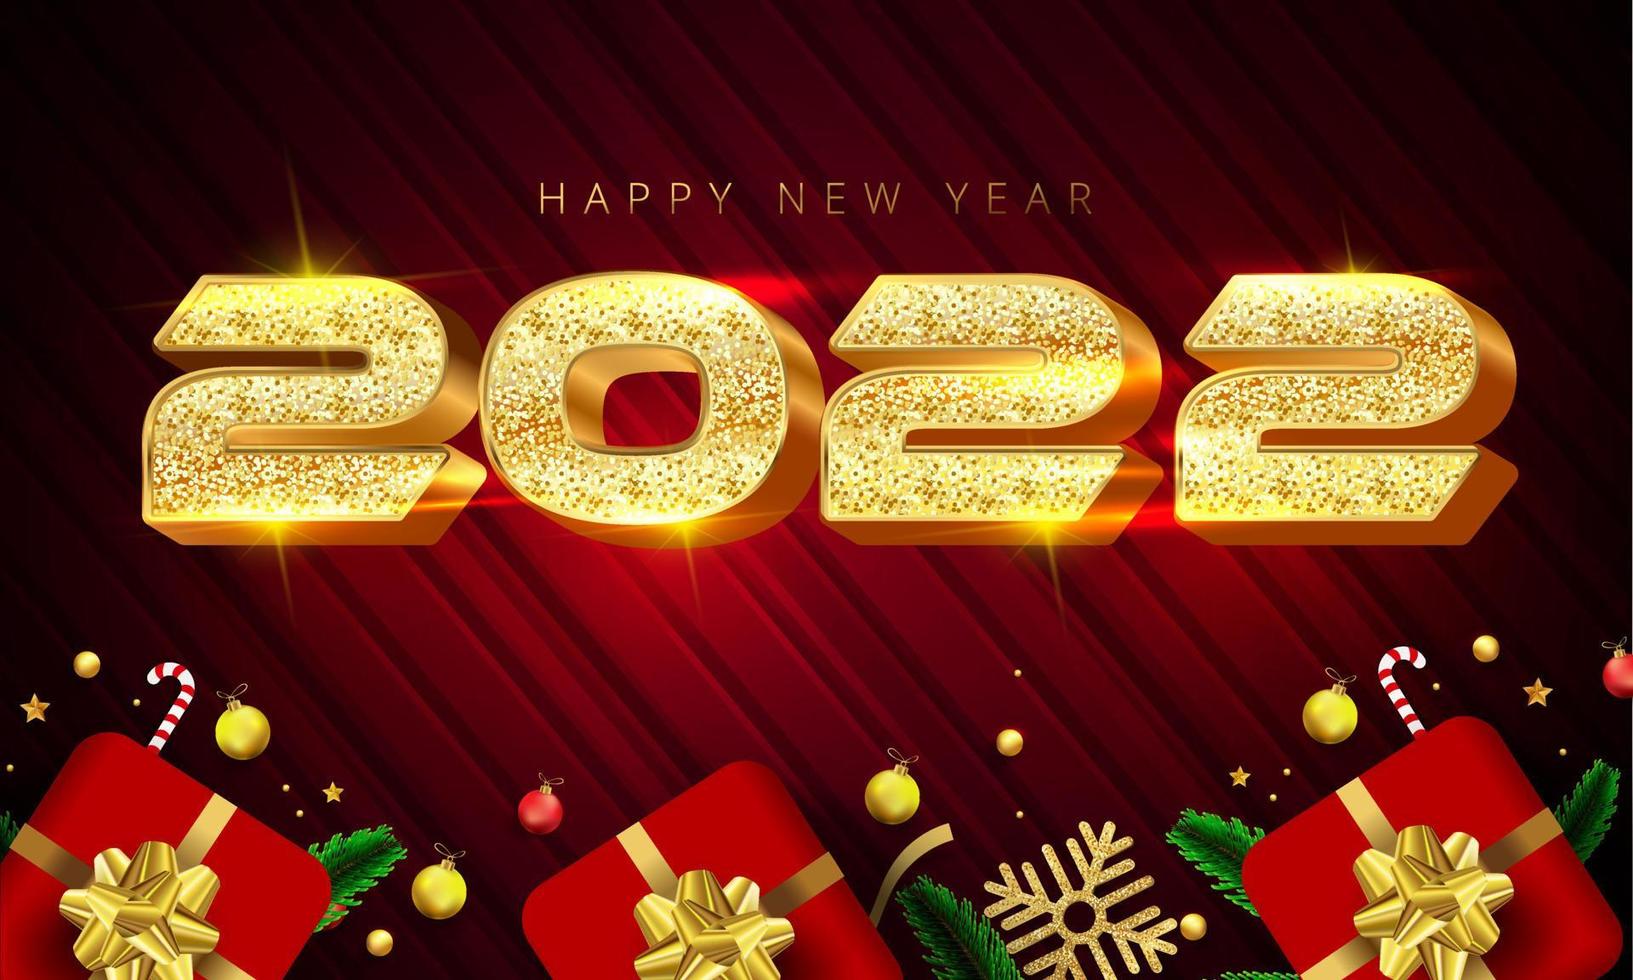 Shiny golden color style 2022 happy new year lettering, Gift boxes, gold snowflakes, baubles, stars and pine leaves around on red background. Can be used as poster, banner or template design. vector